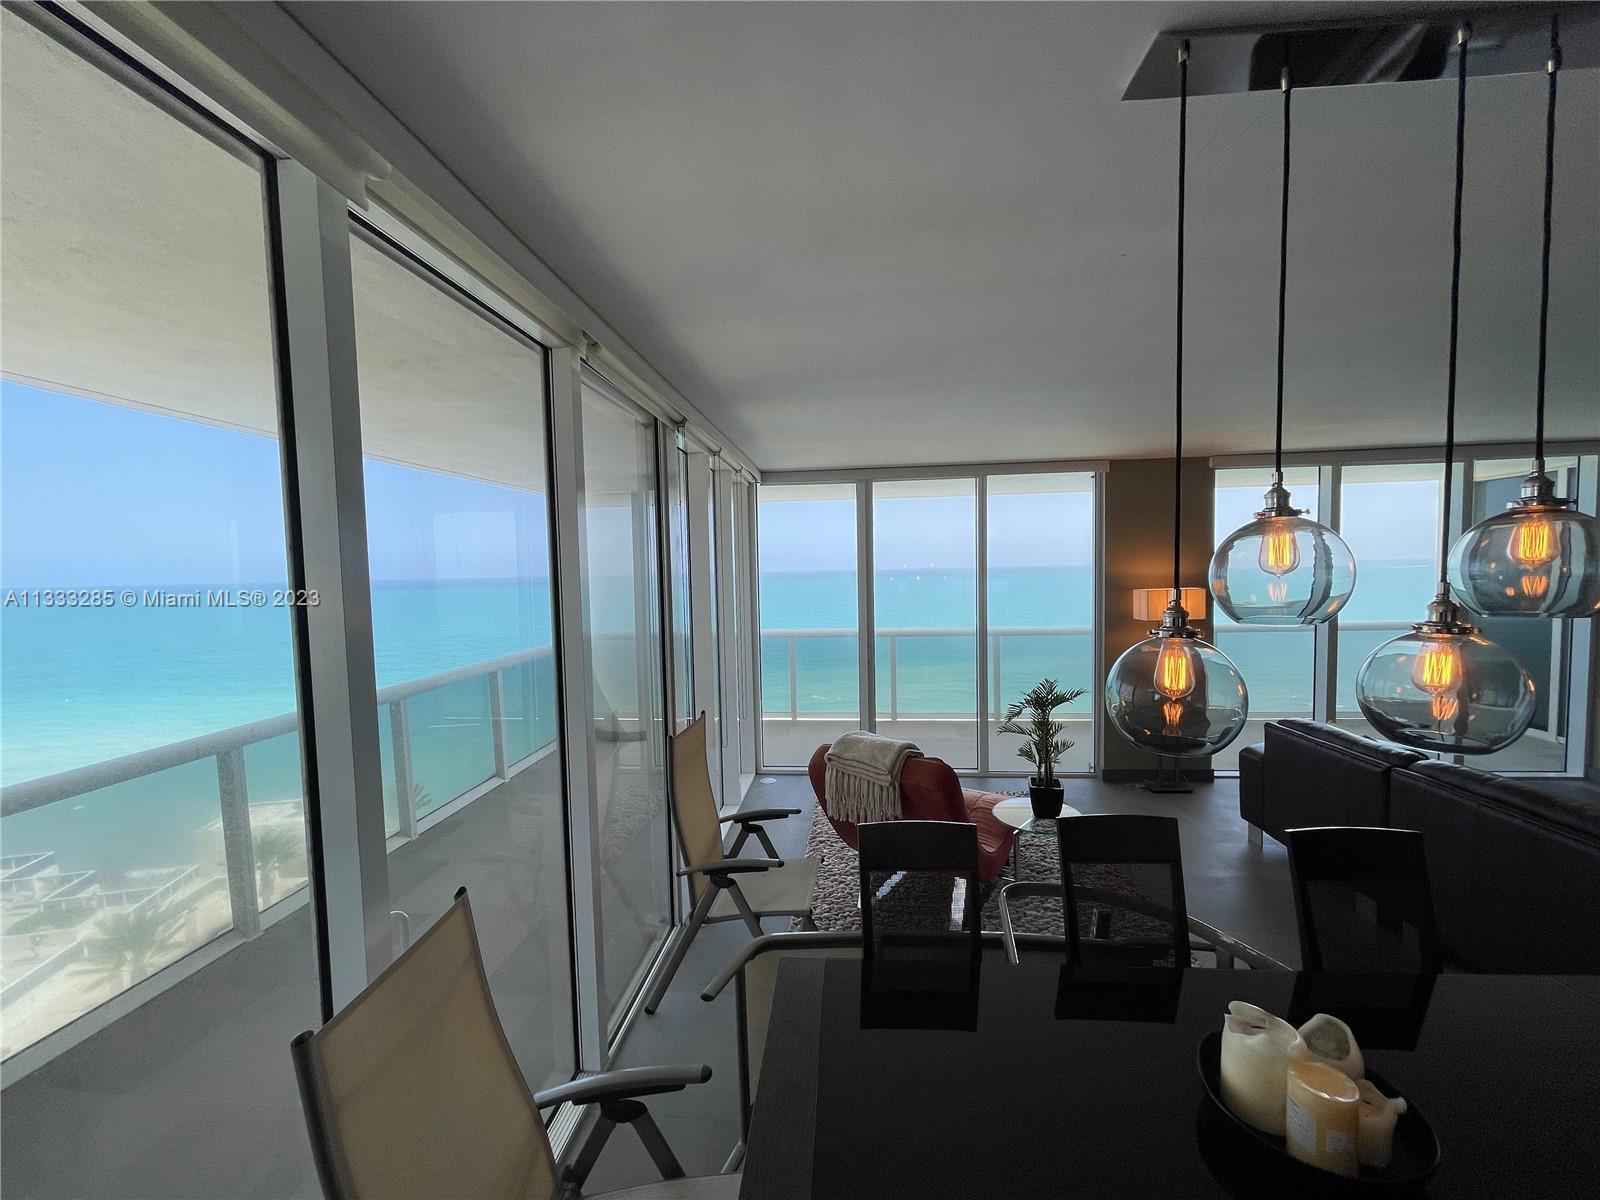 Large corner unit with direct Ocean views. Spacious 3 Bed / 3.5 Bath with oversized terrace, grey ce